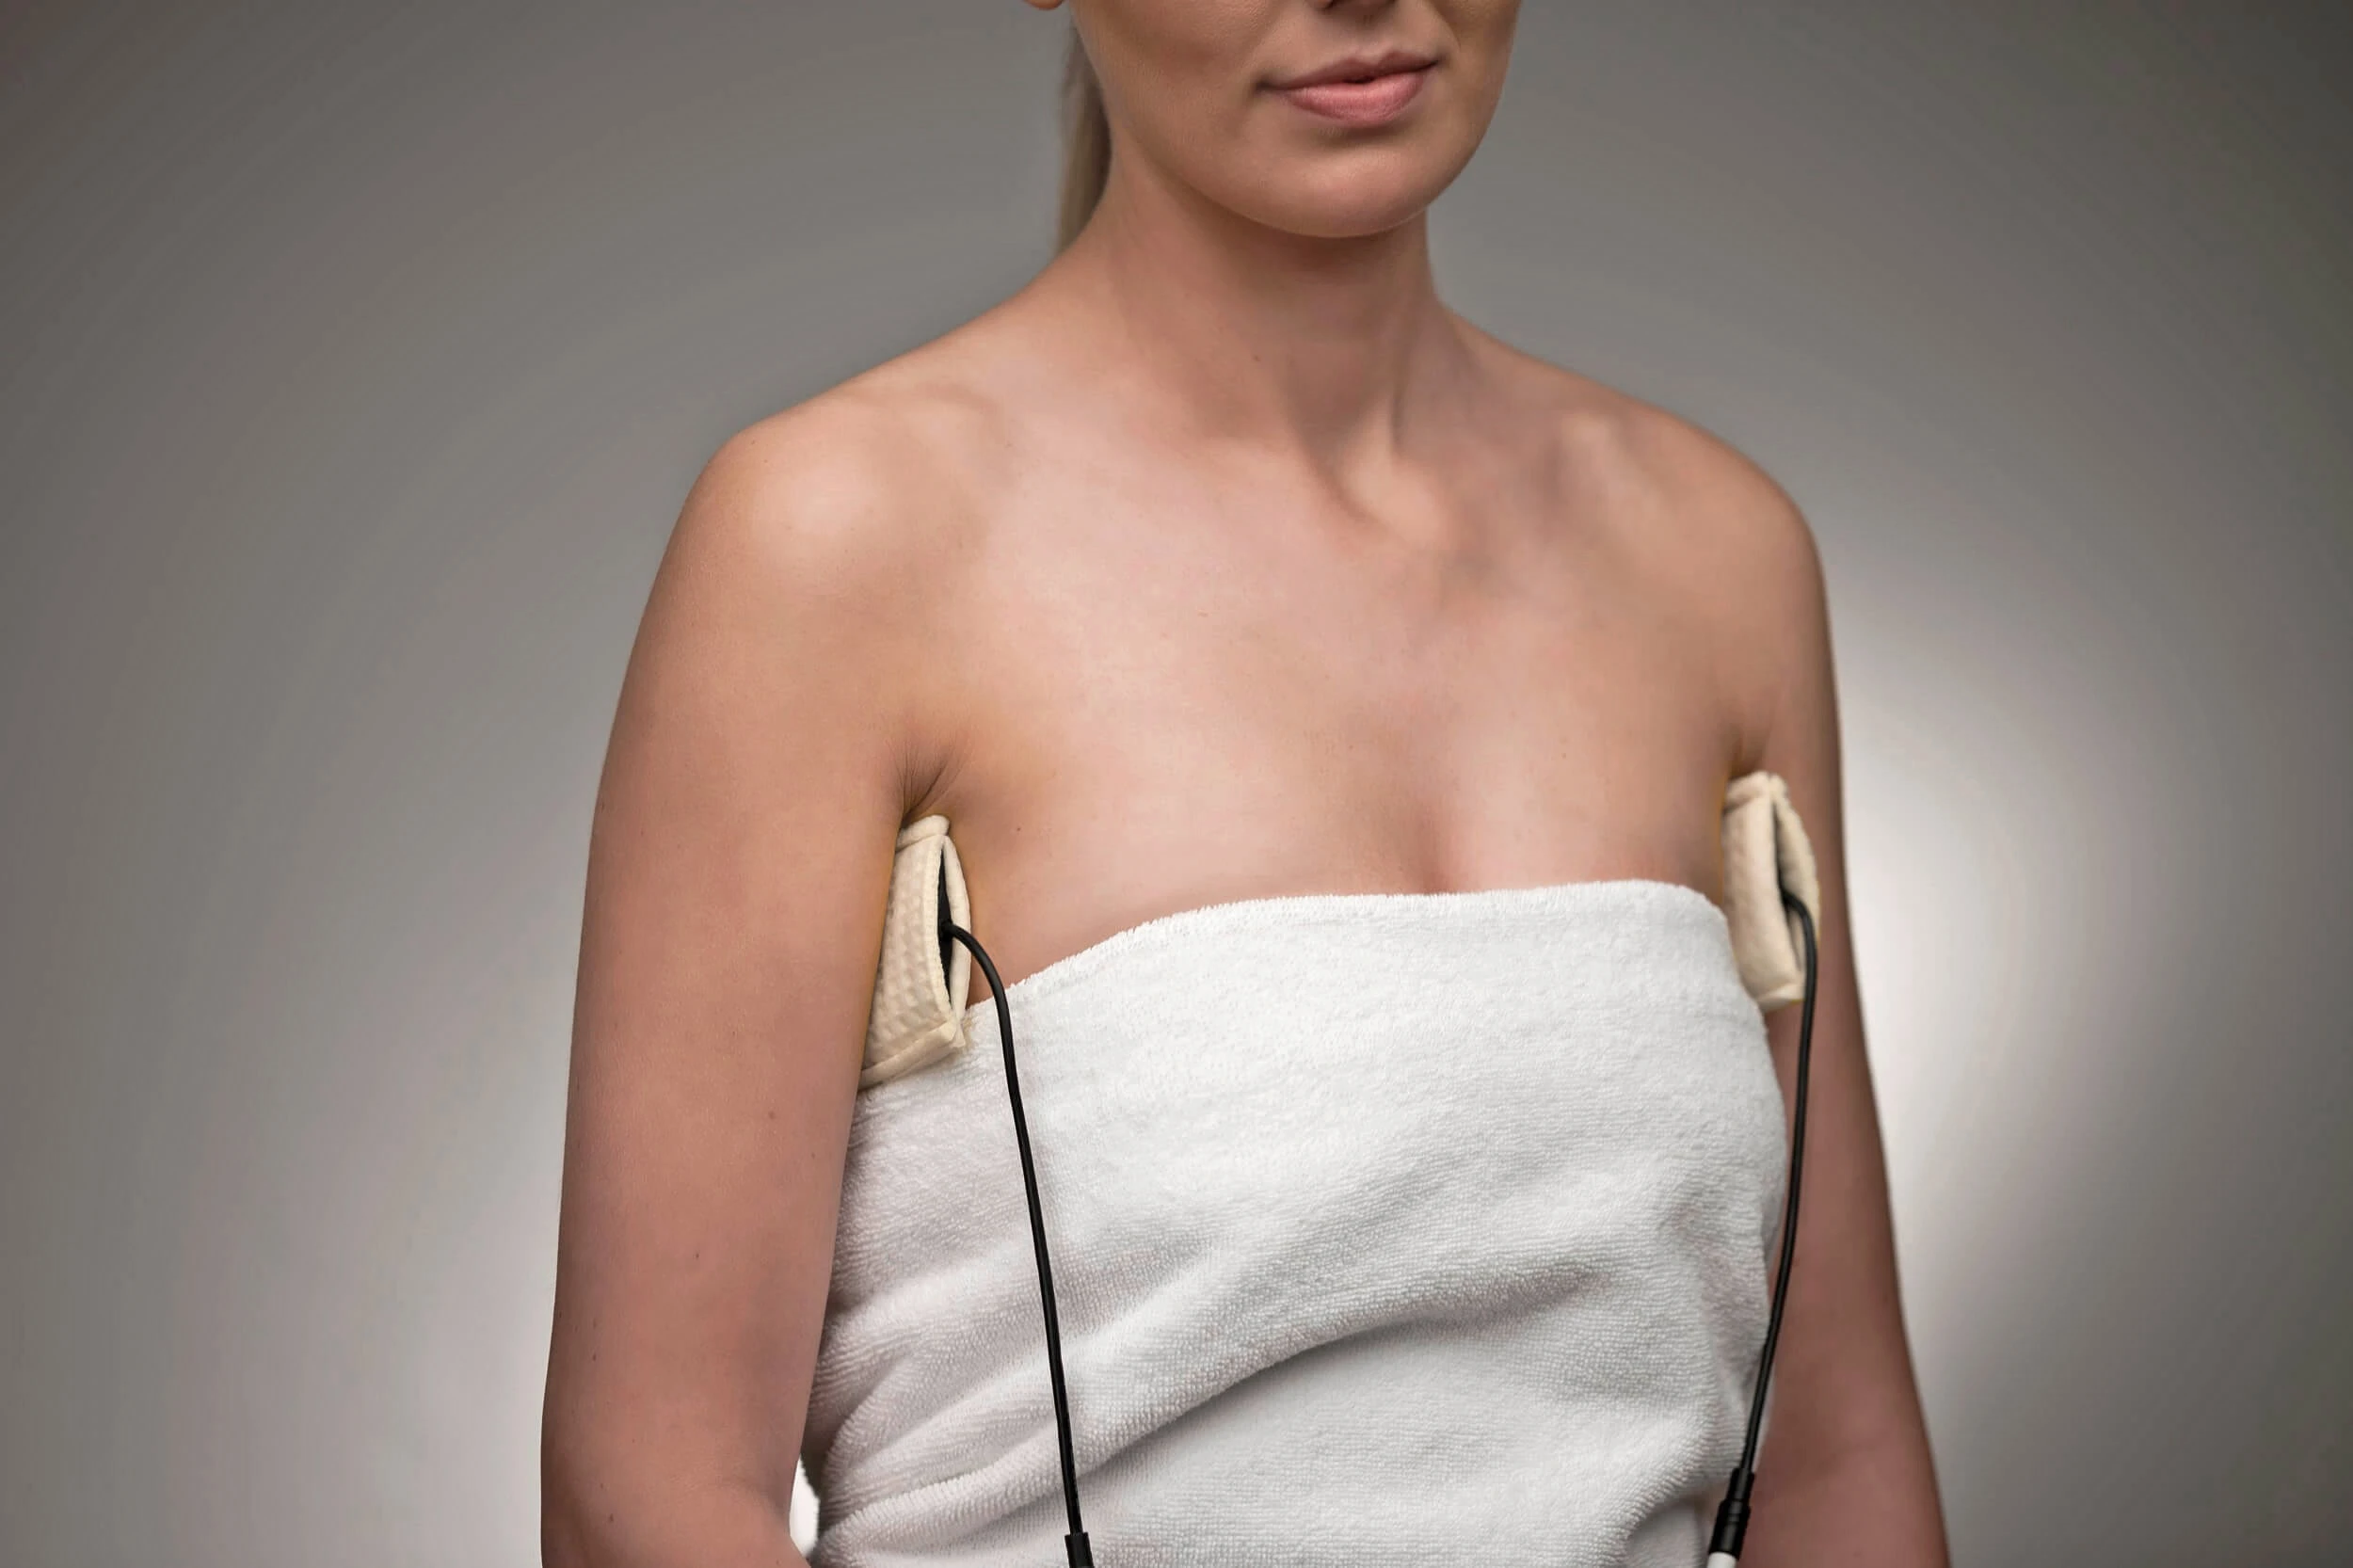 Photograph of a woman facing the camera wearing a white towel around herself. She has The Fischer's underarm attachments in her armpits and is using The Fischer to treat her axillary hyperhidrosis.